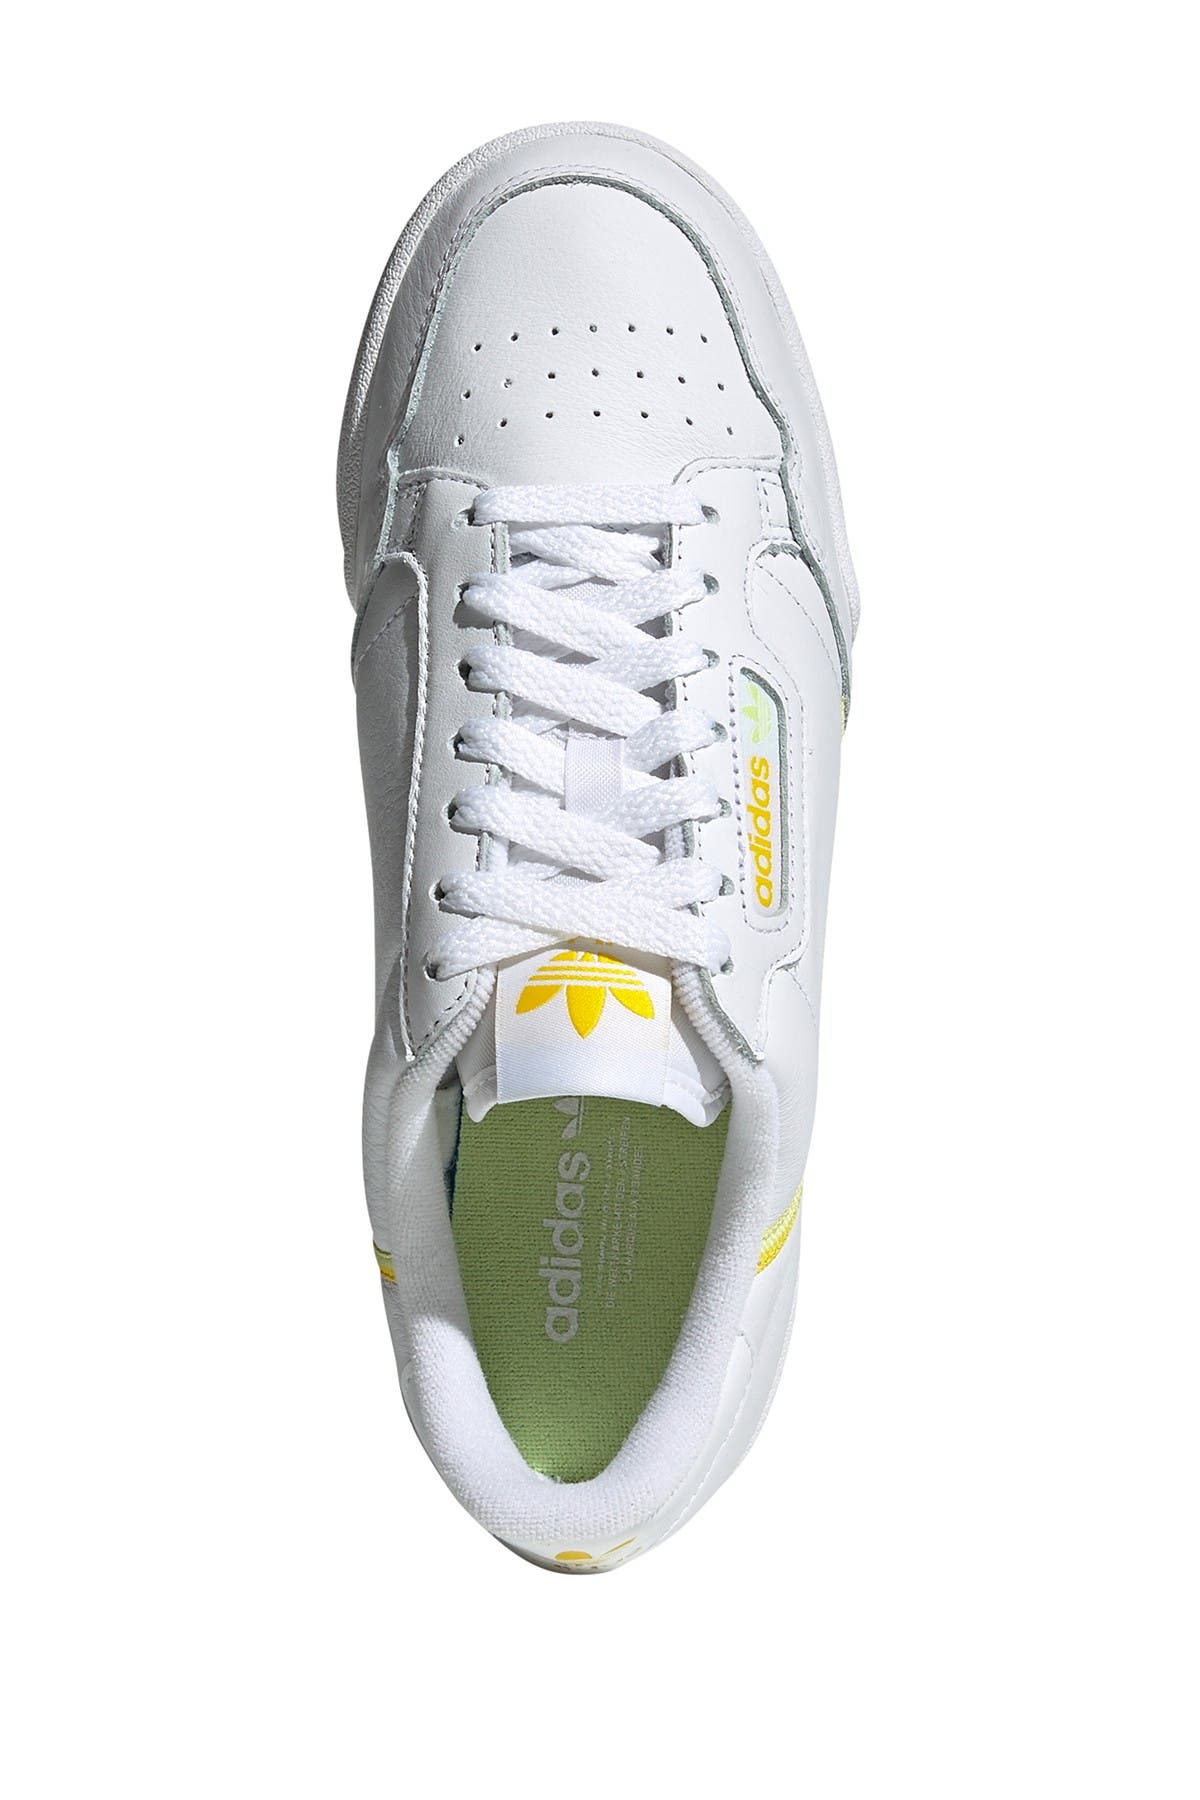 adidas continental 8s shoes